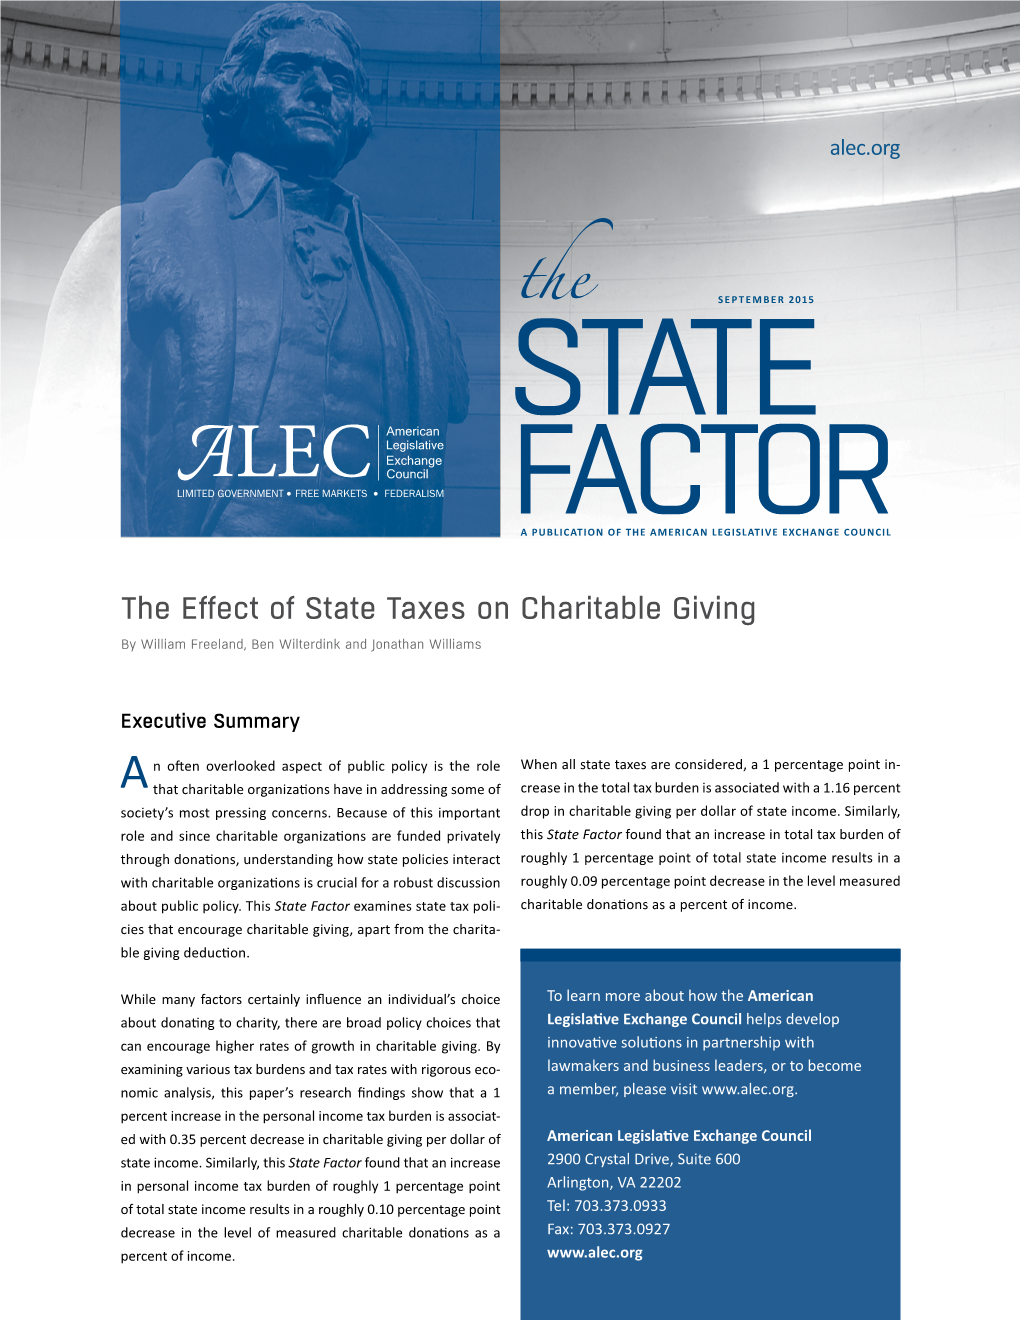 The Effect of State Taxes on Charitable Giving by William Freeland, Ben Wilterdink and Jonathan Williams